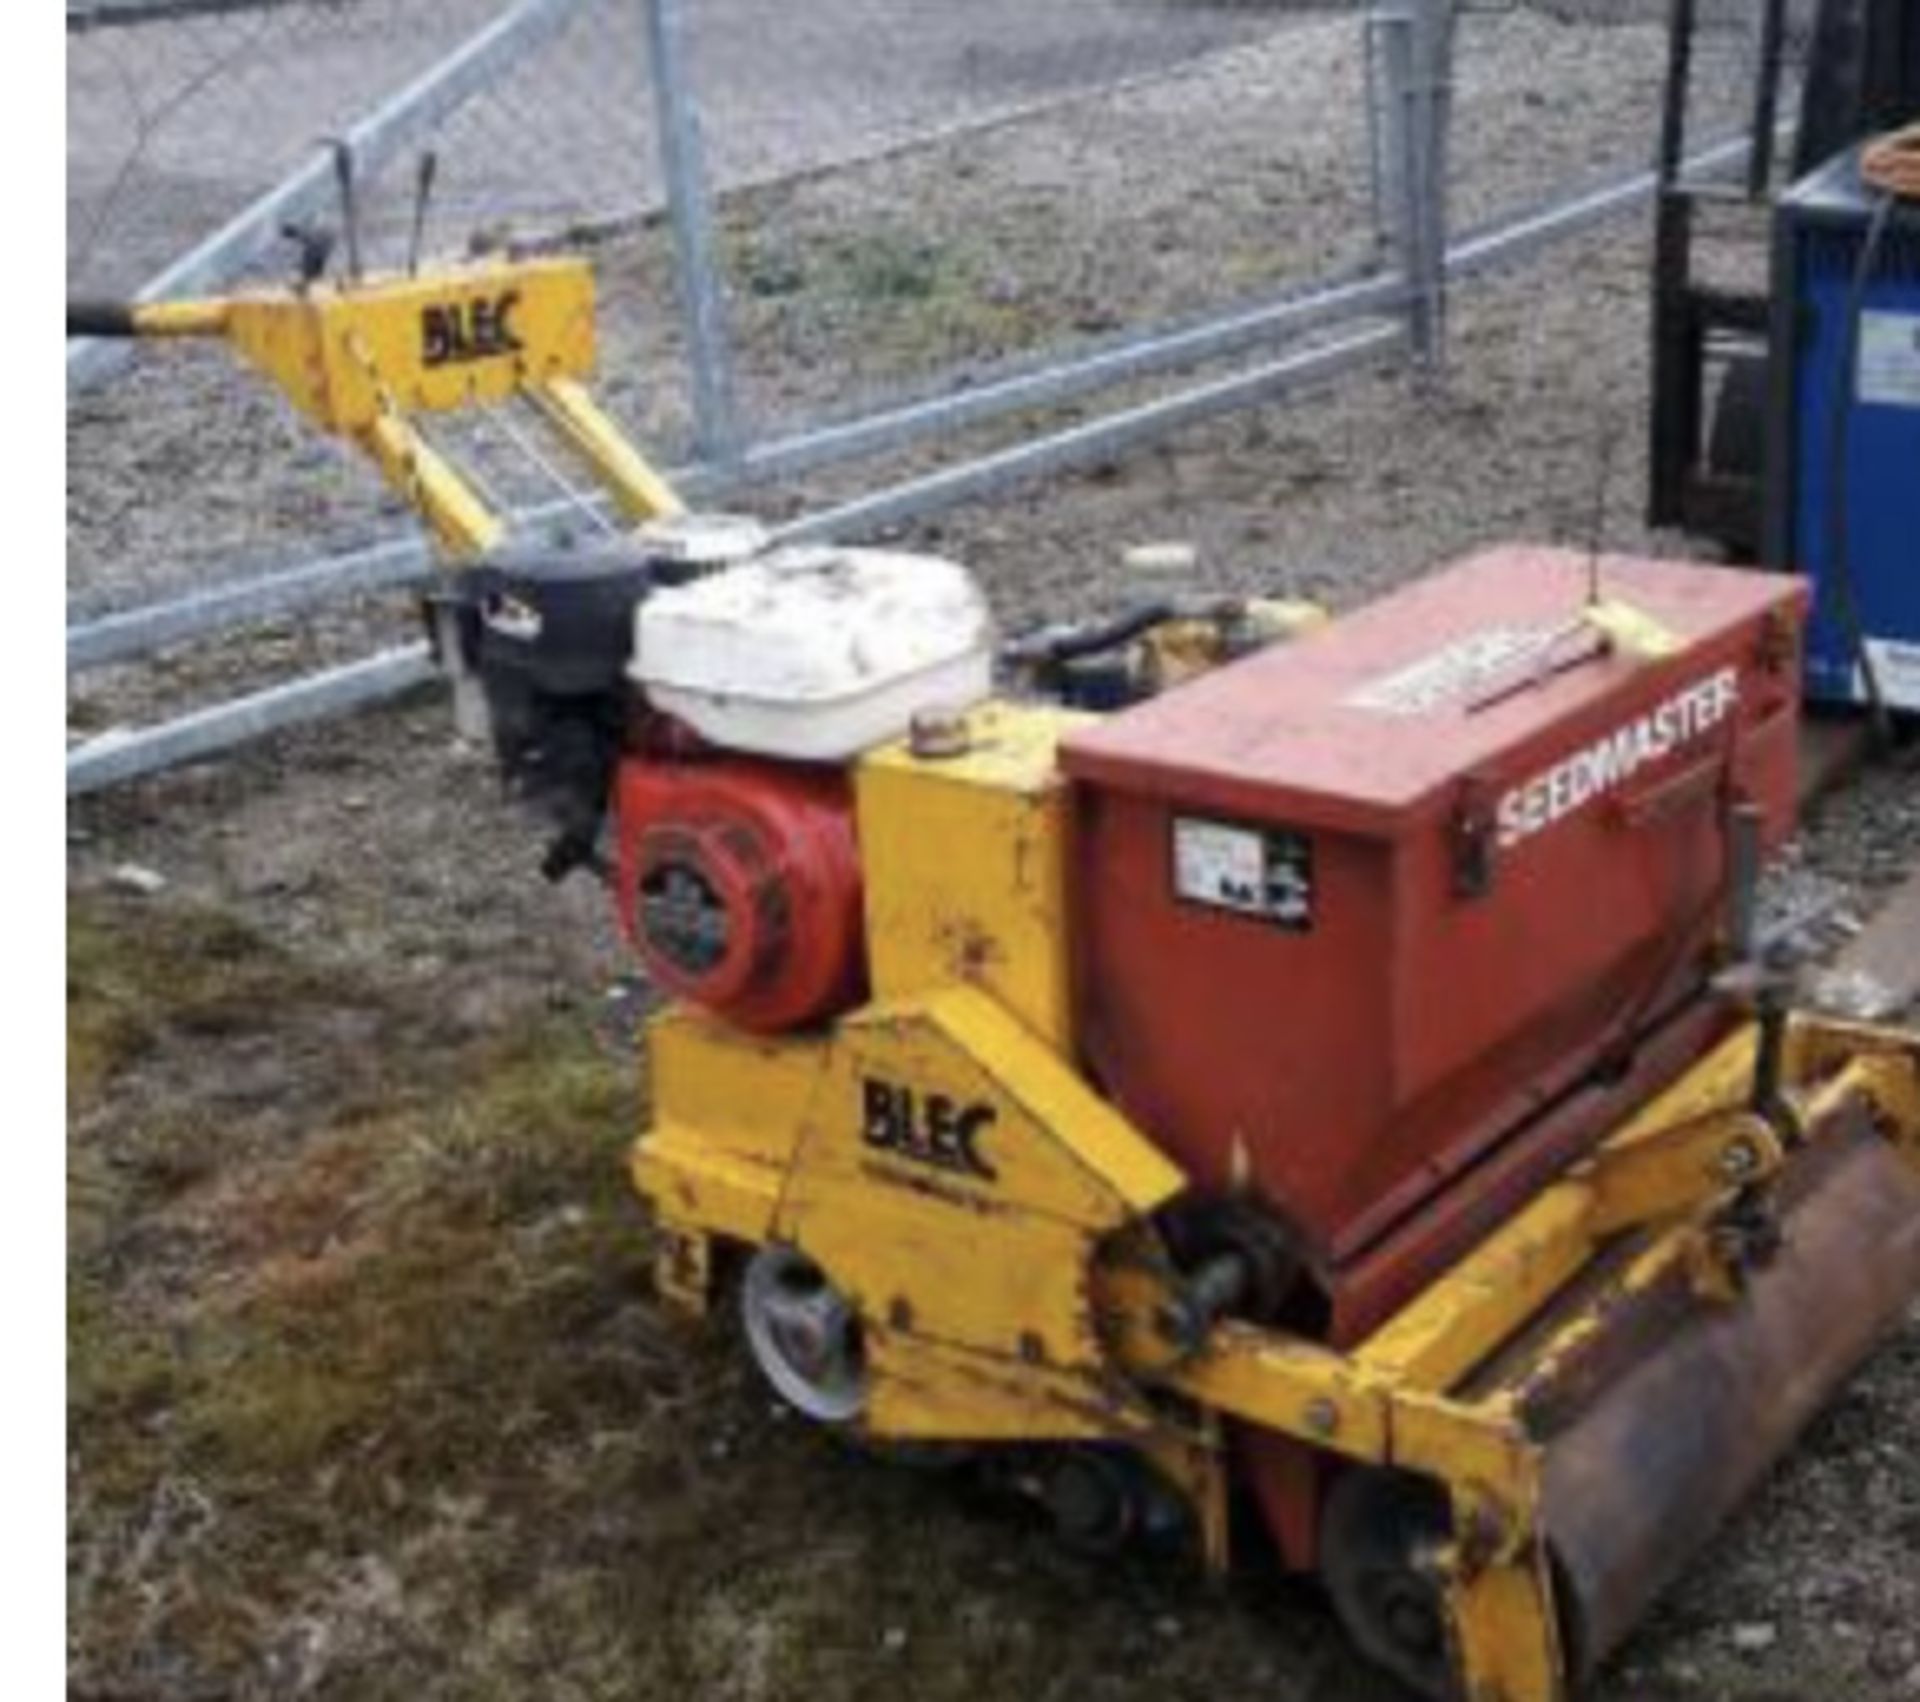 BLEC SEEDER HONDA PETROL ENGINE WITH COMACTION PLATE.LOCATION NORTHERN IRELAND. - Image 2 of 4